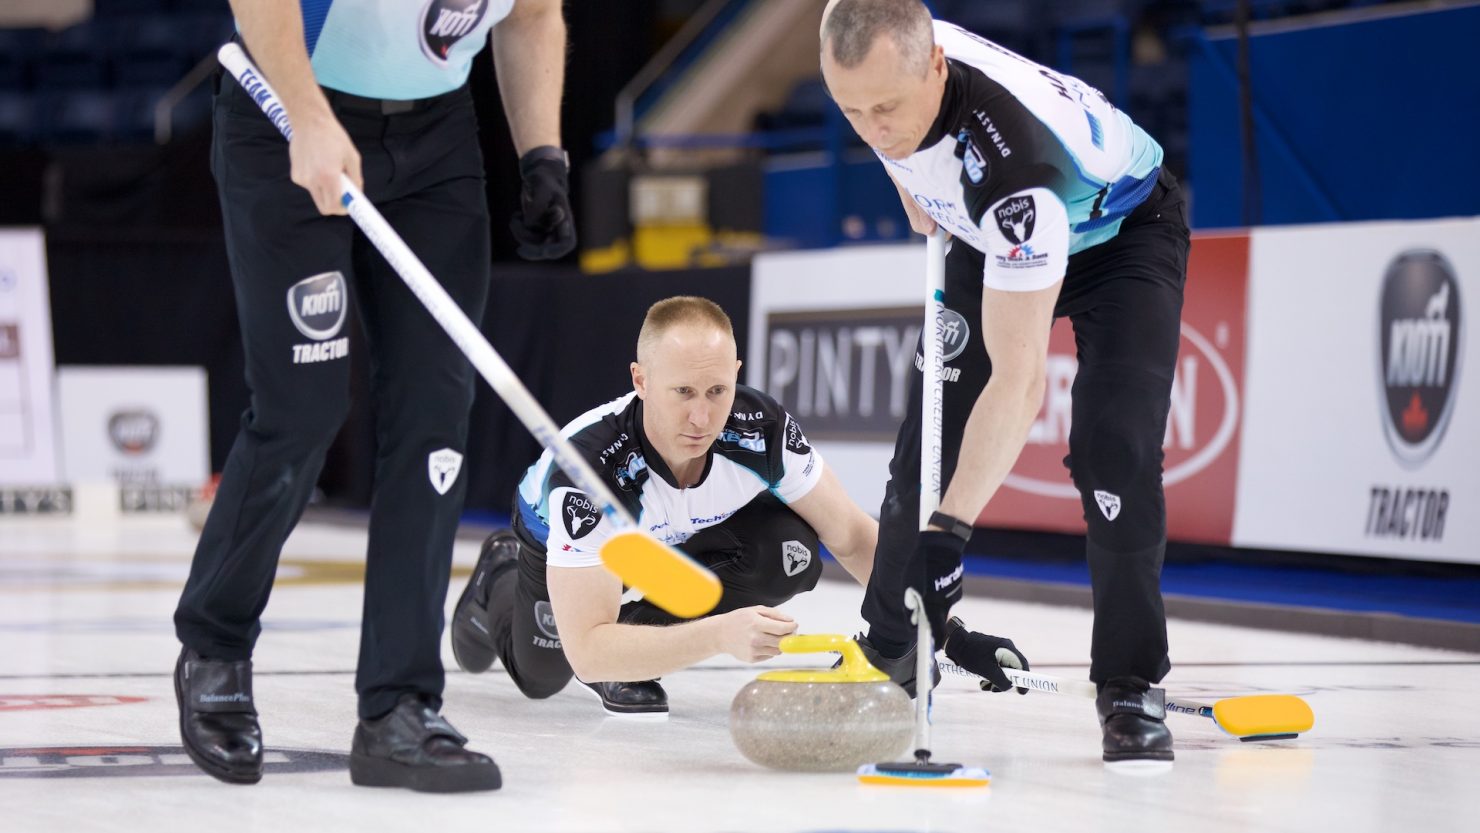 Olympic champion Brad Jacobs returns to curling